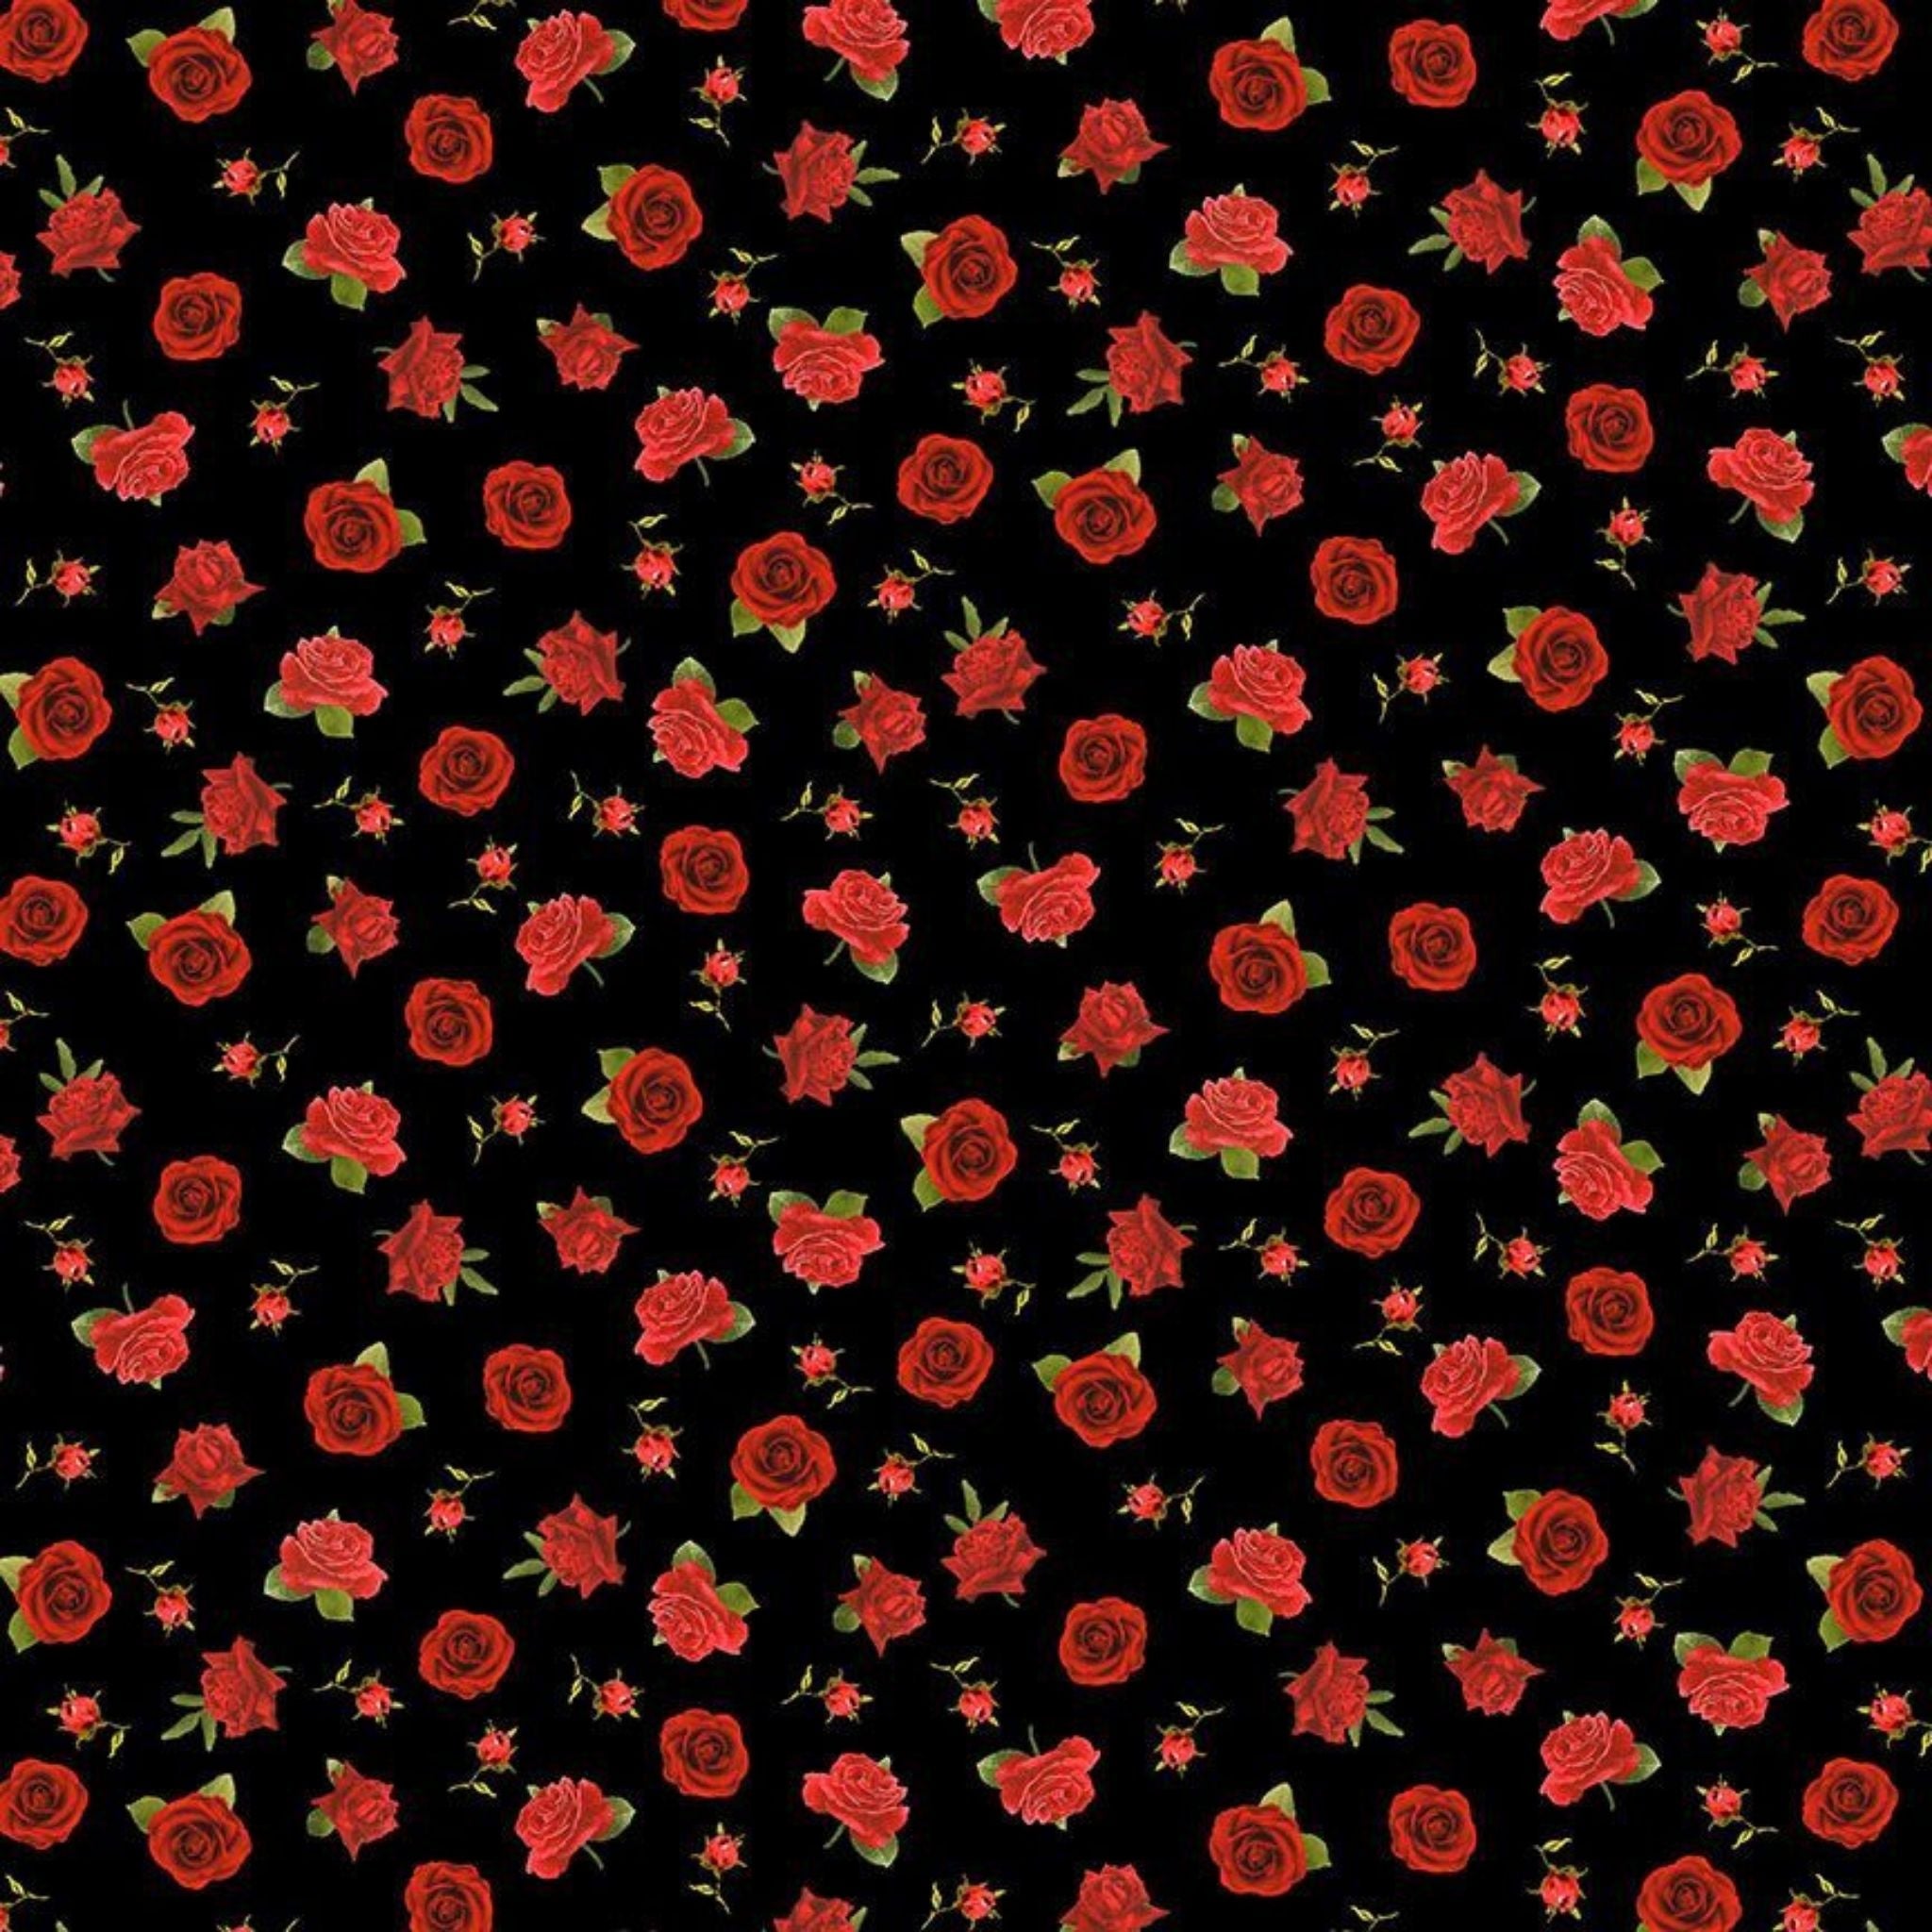 Red roses on black cotton fabric - Vintage Rose by Timeless Treasures